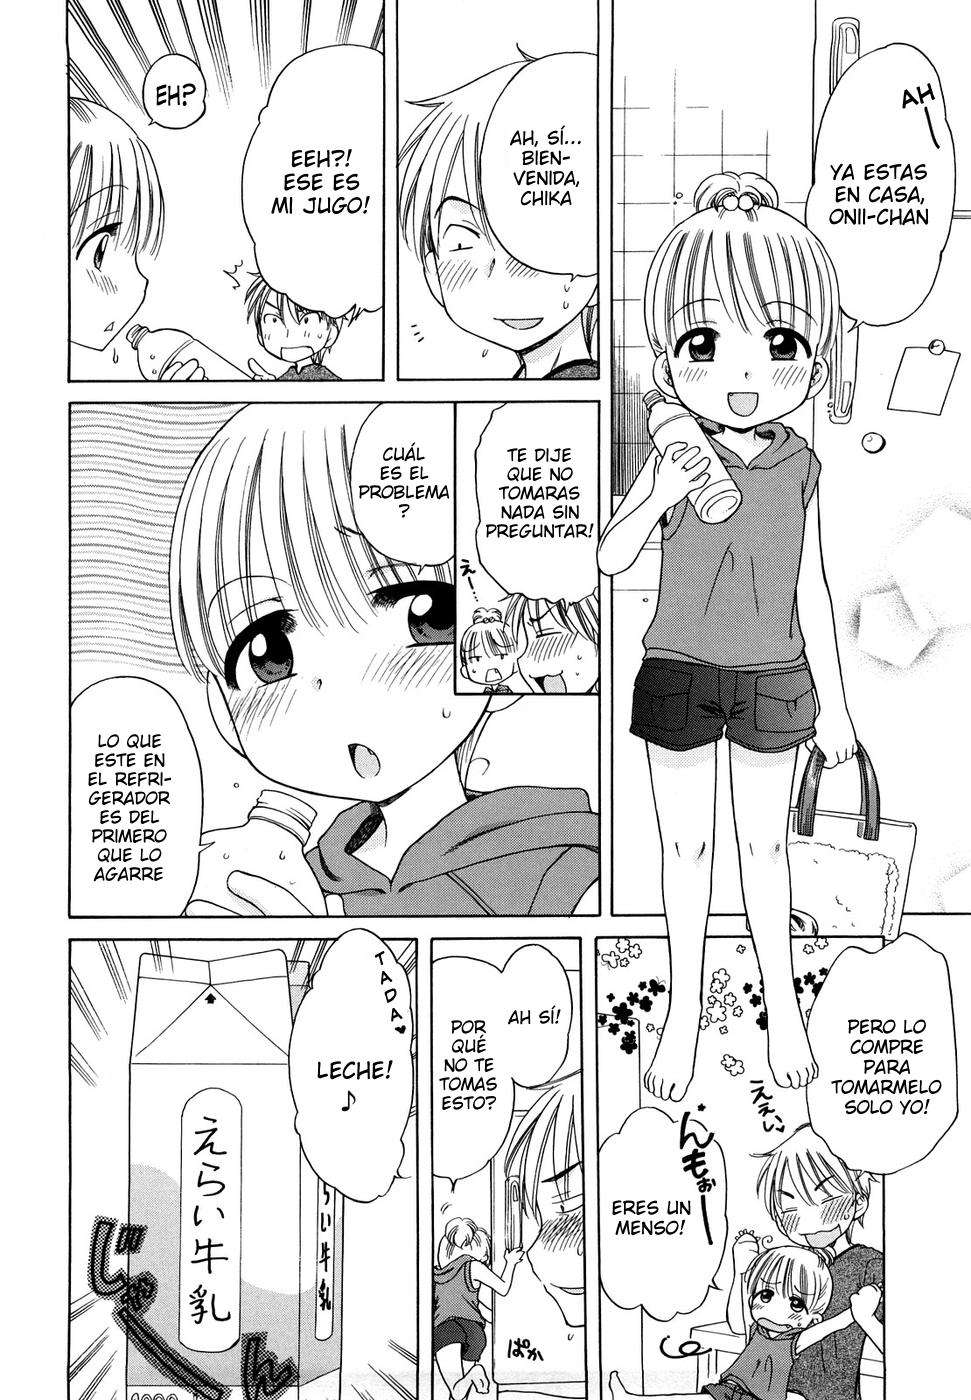 Onii-chan!! Me gustas.. Chapter-3 - 5